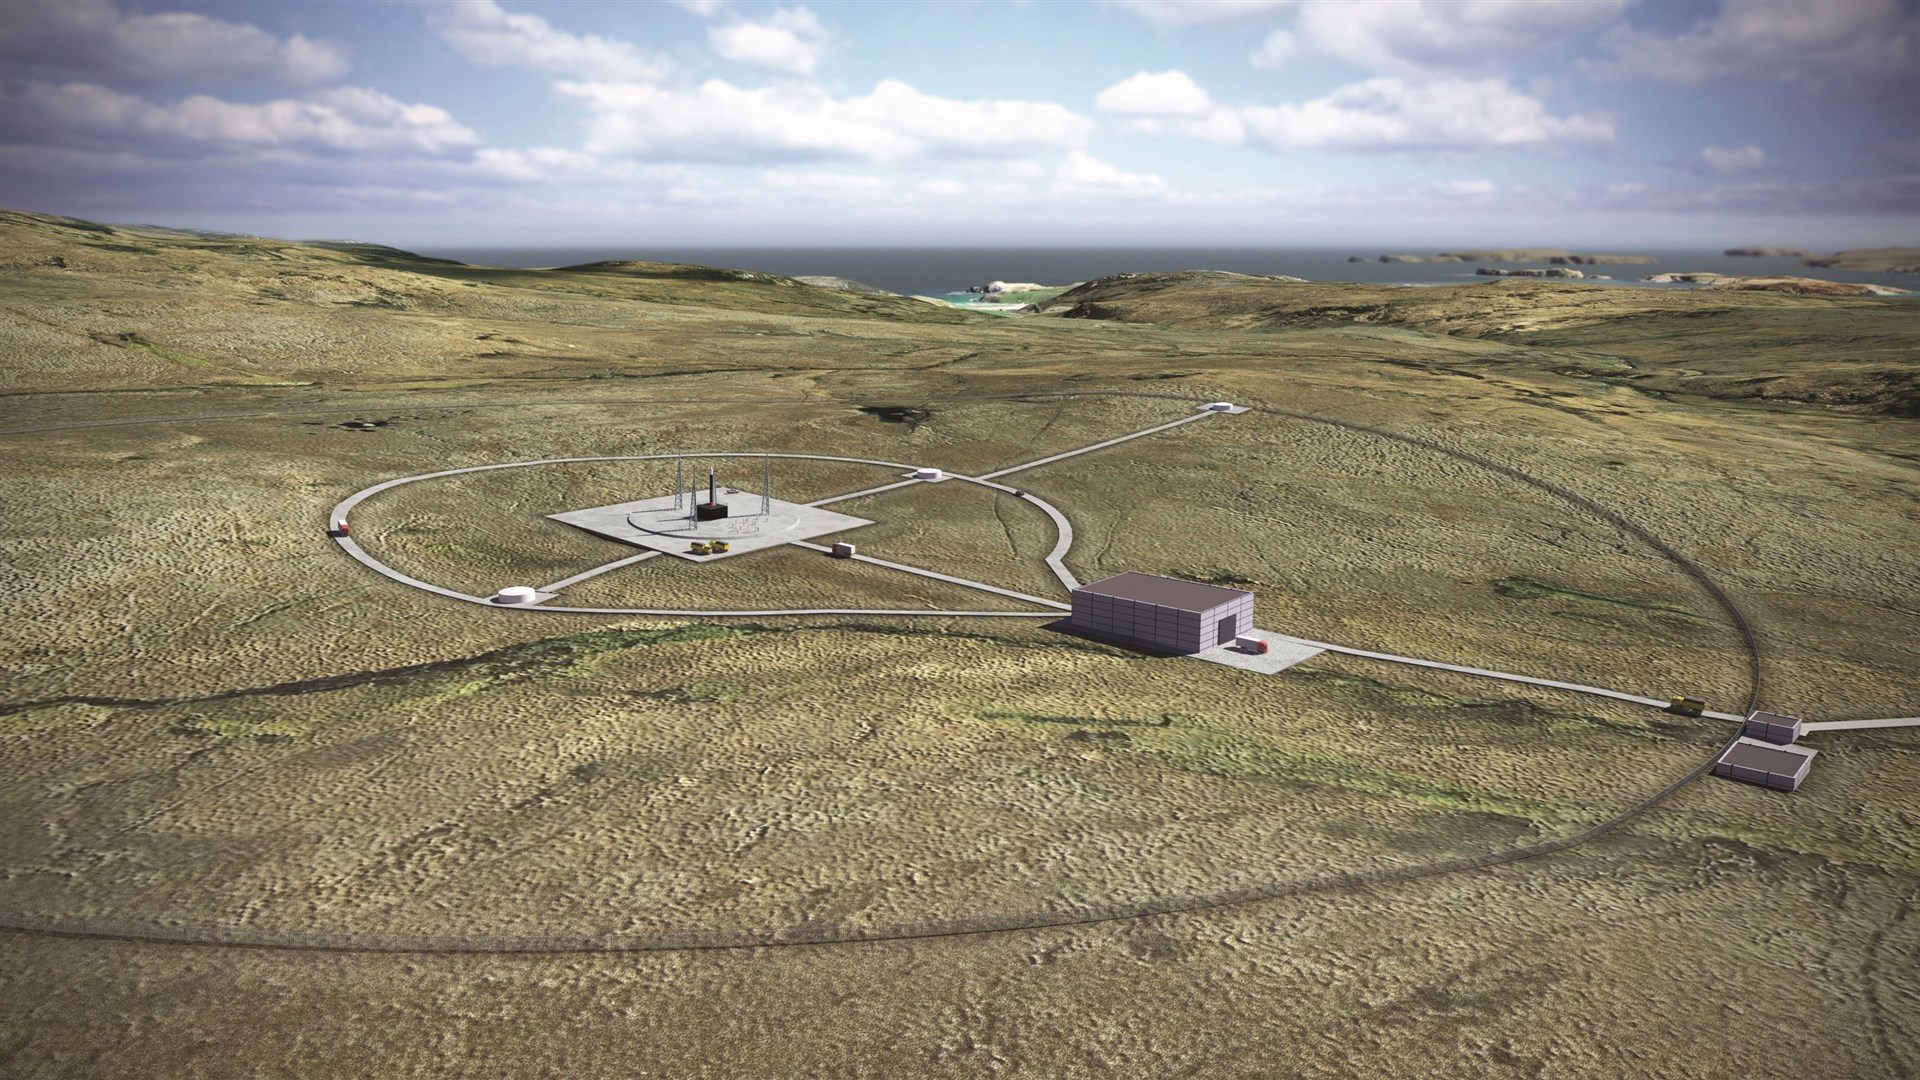 The Sutherland Space Hub was granted planning permission last year but that decision will be challenged in the courts.